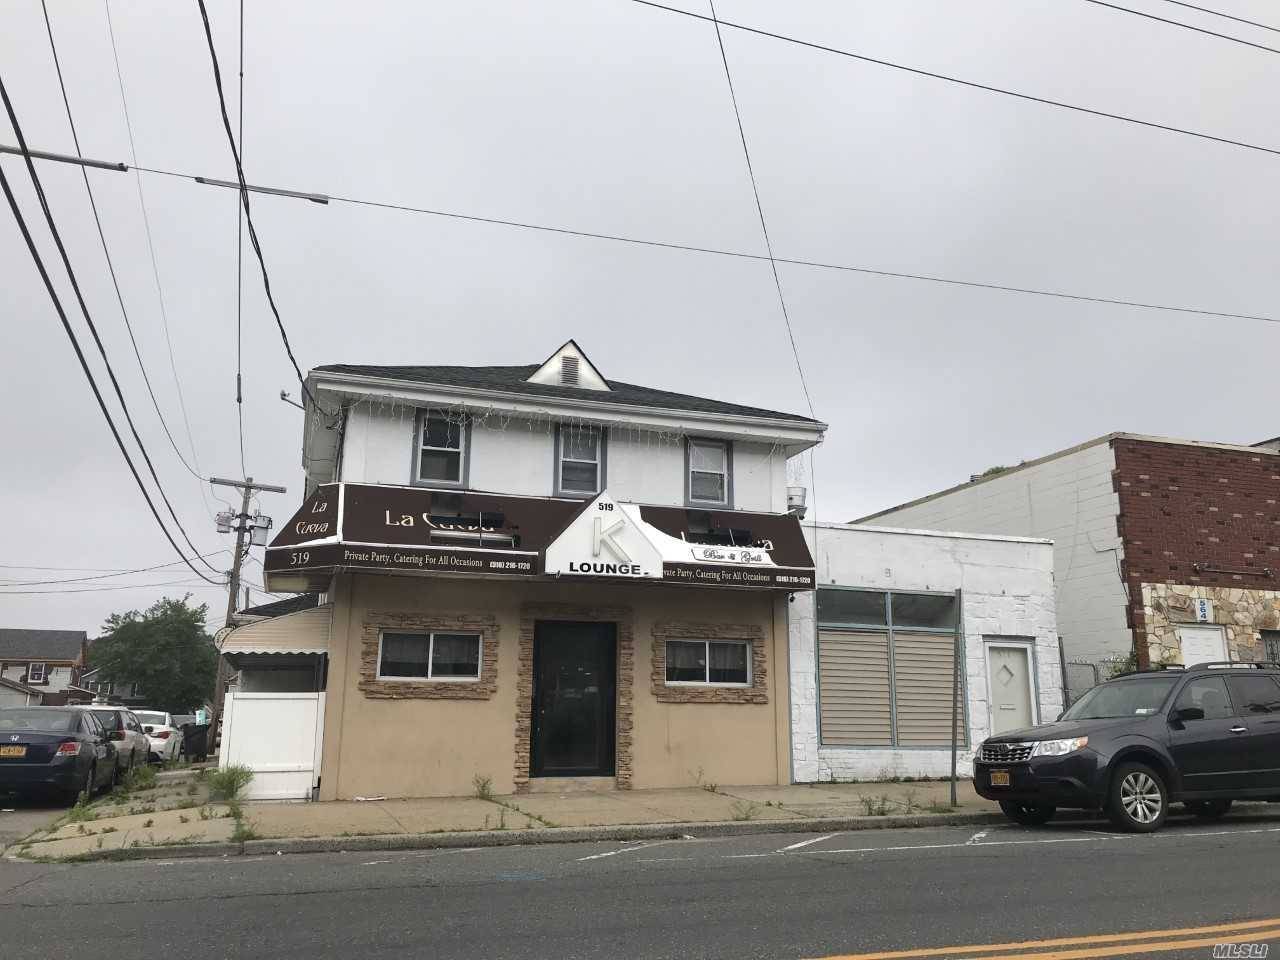 4400 Sq Ft Mixed Use Building In Prime Location Of Elmont.